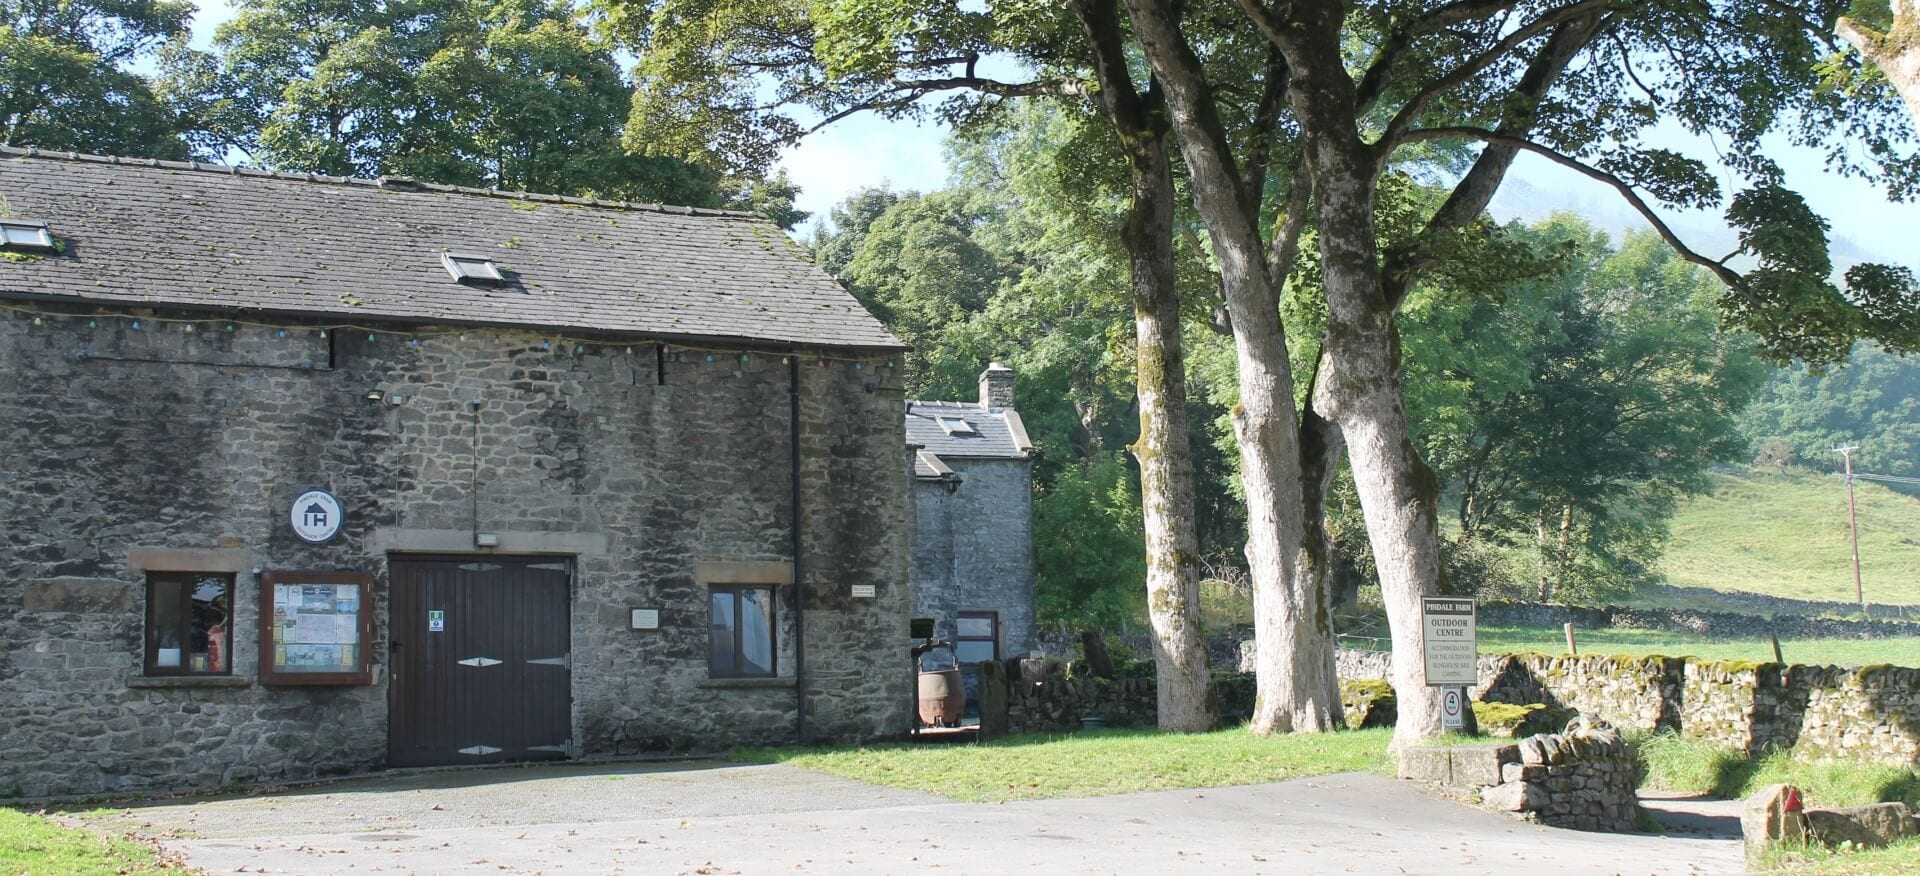 Group accommodation in England at Pindale Farm Bunkhouses